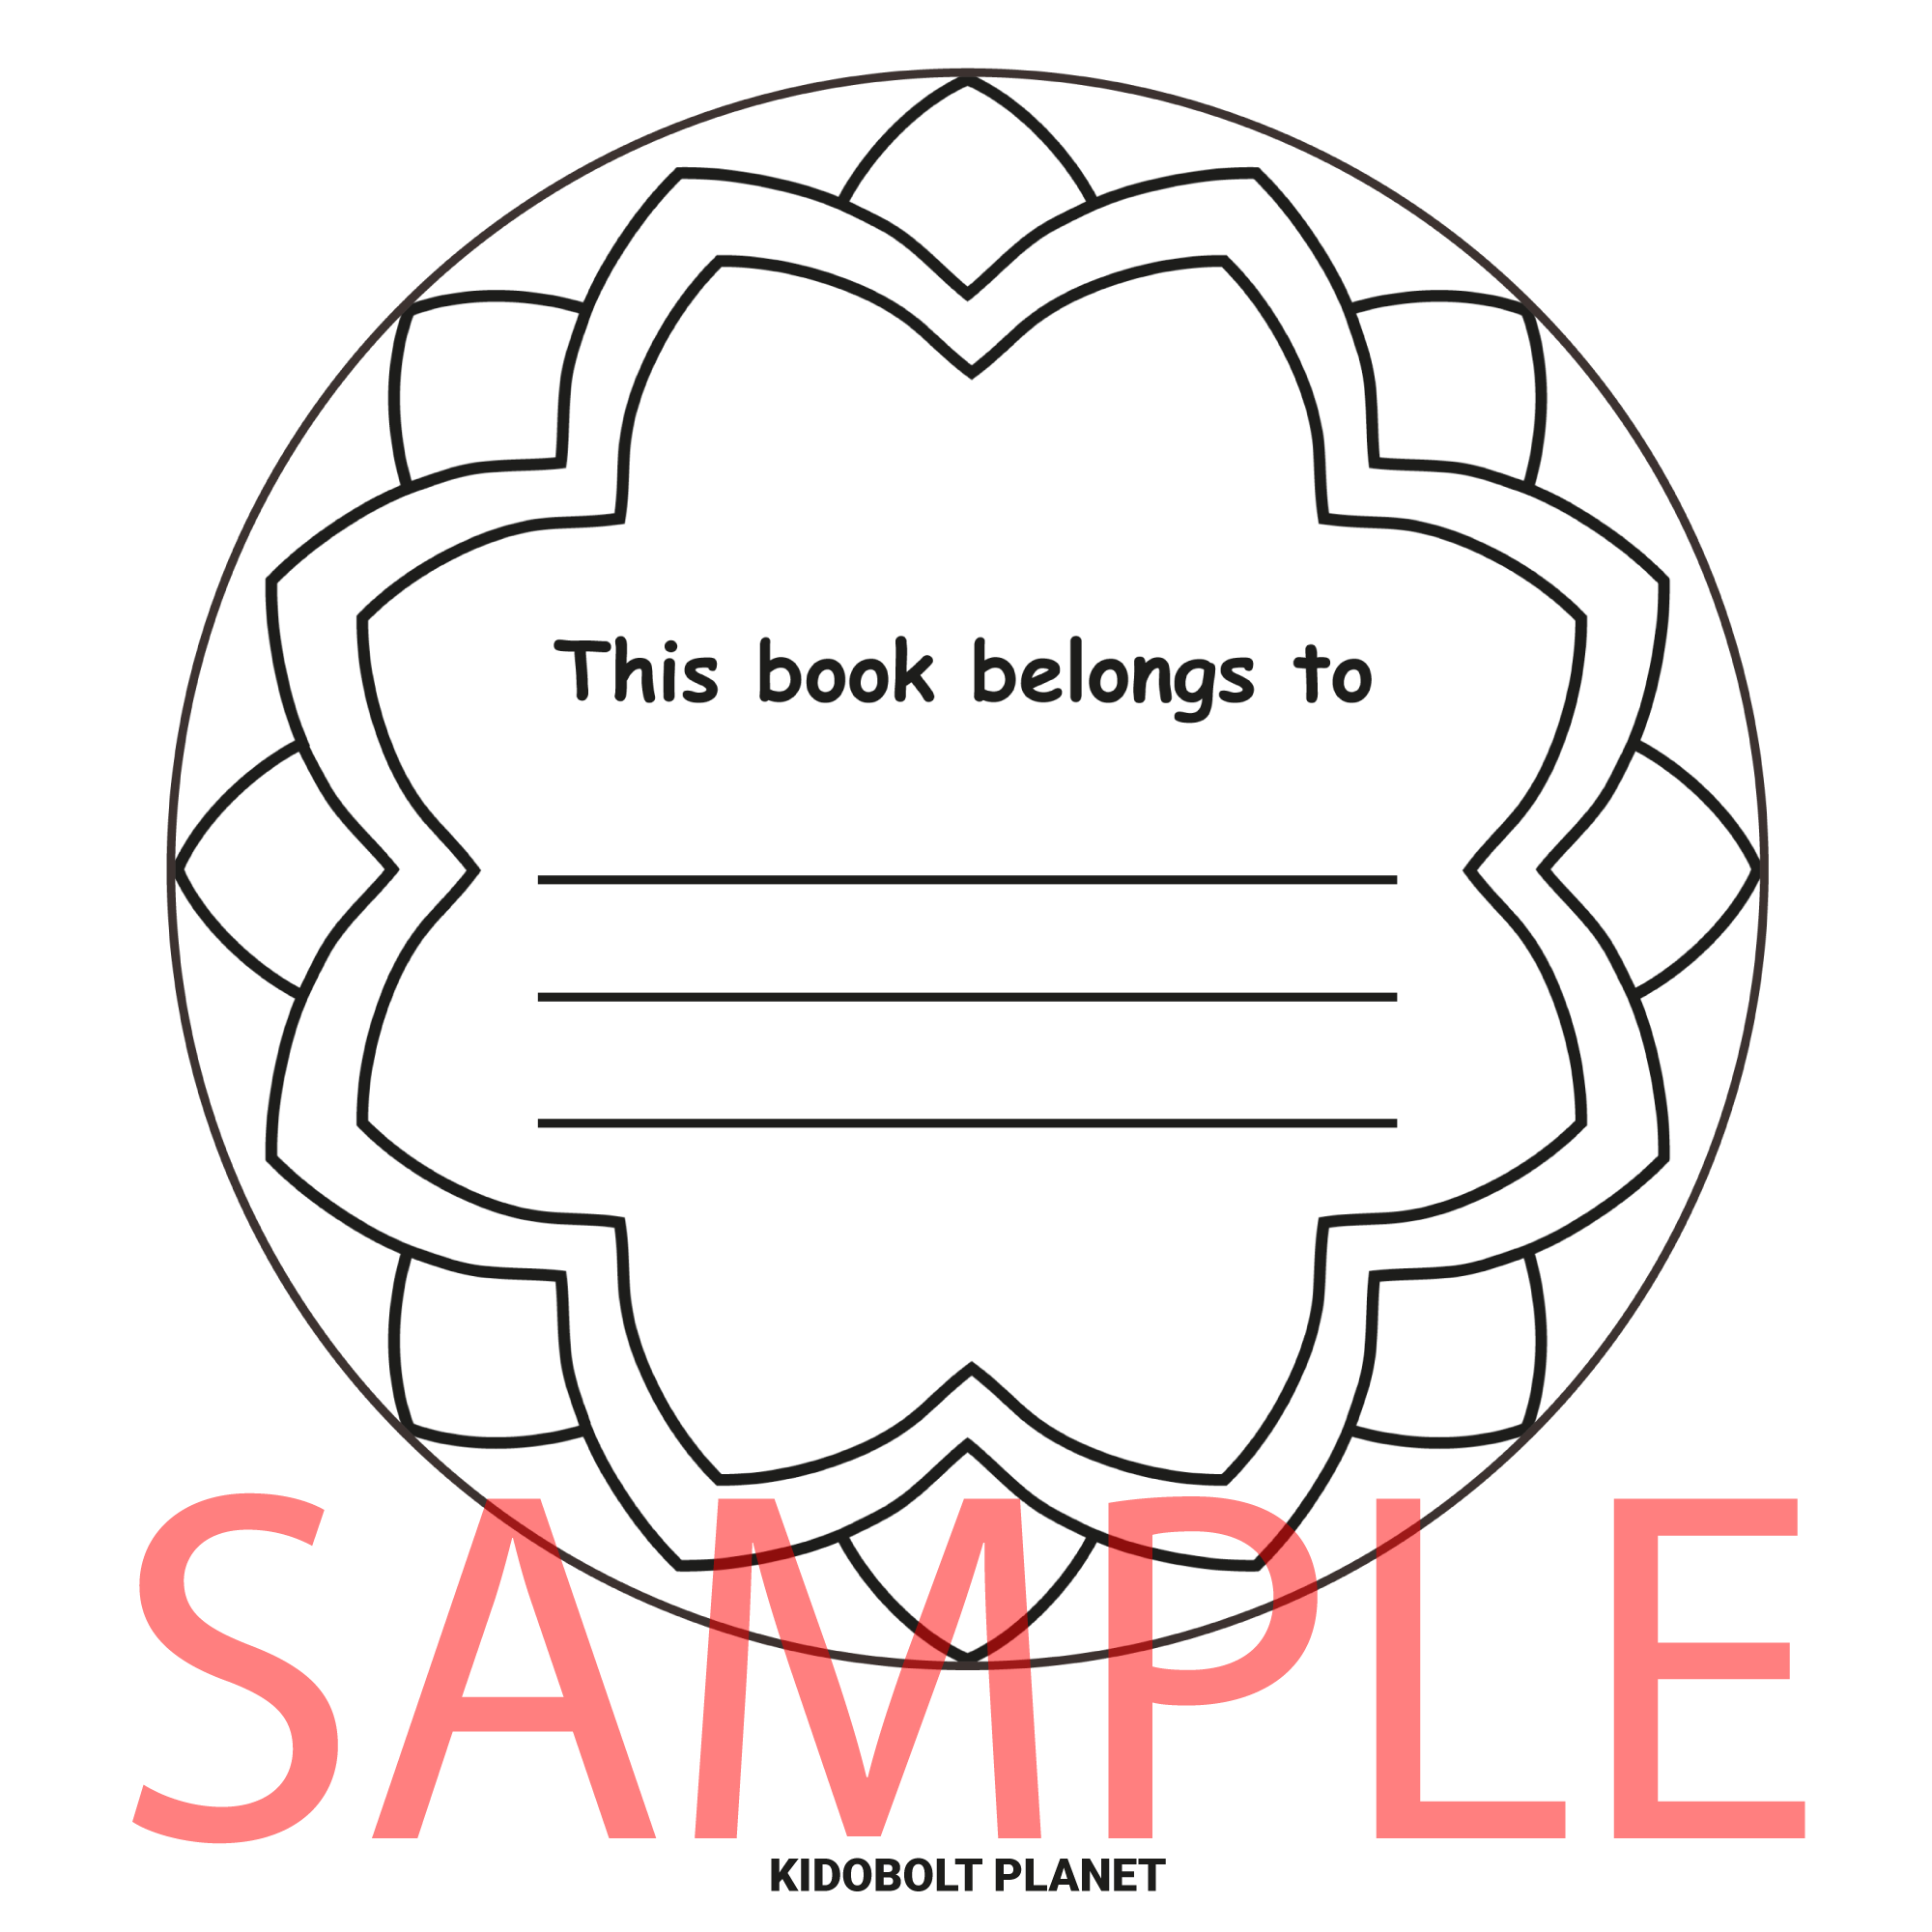 Growth mindset mandala printable coloring book for made by teachers